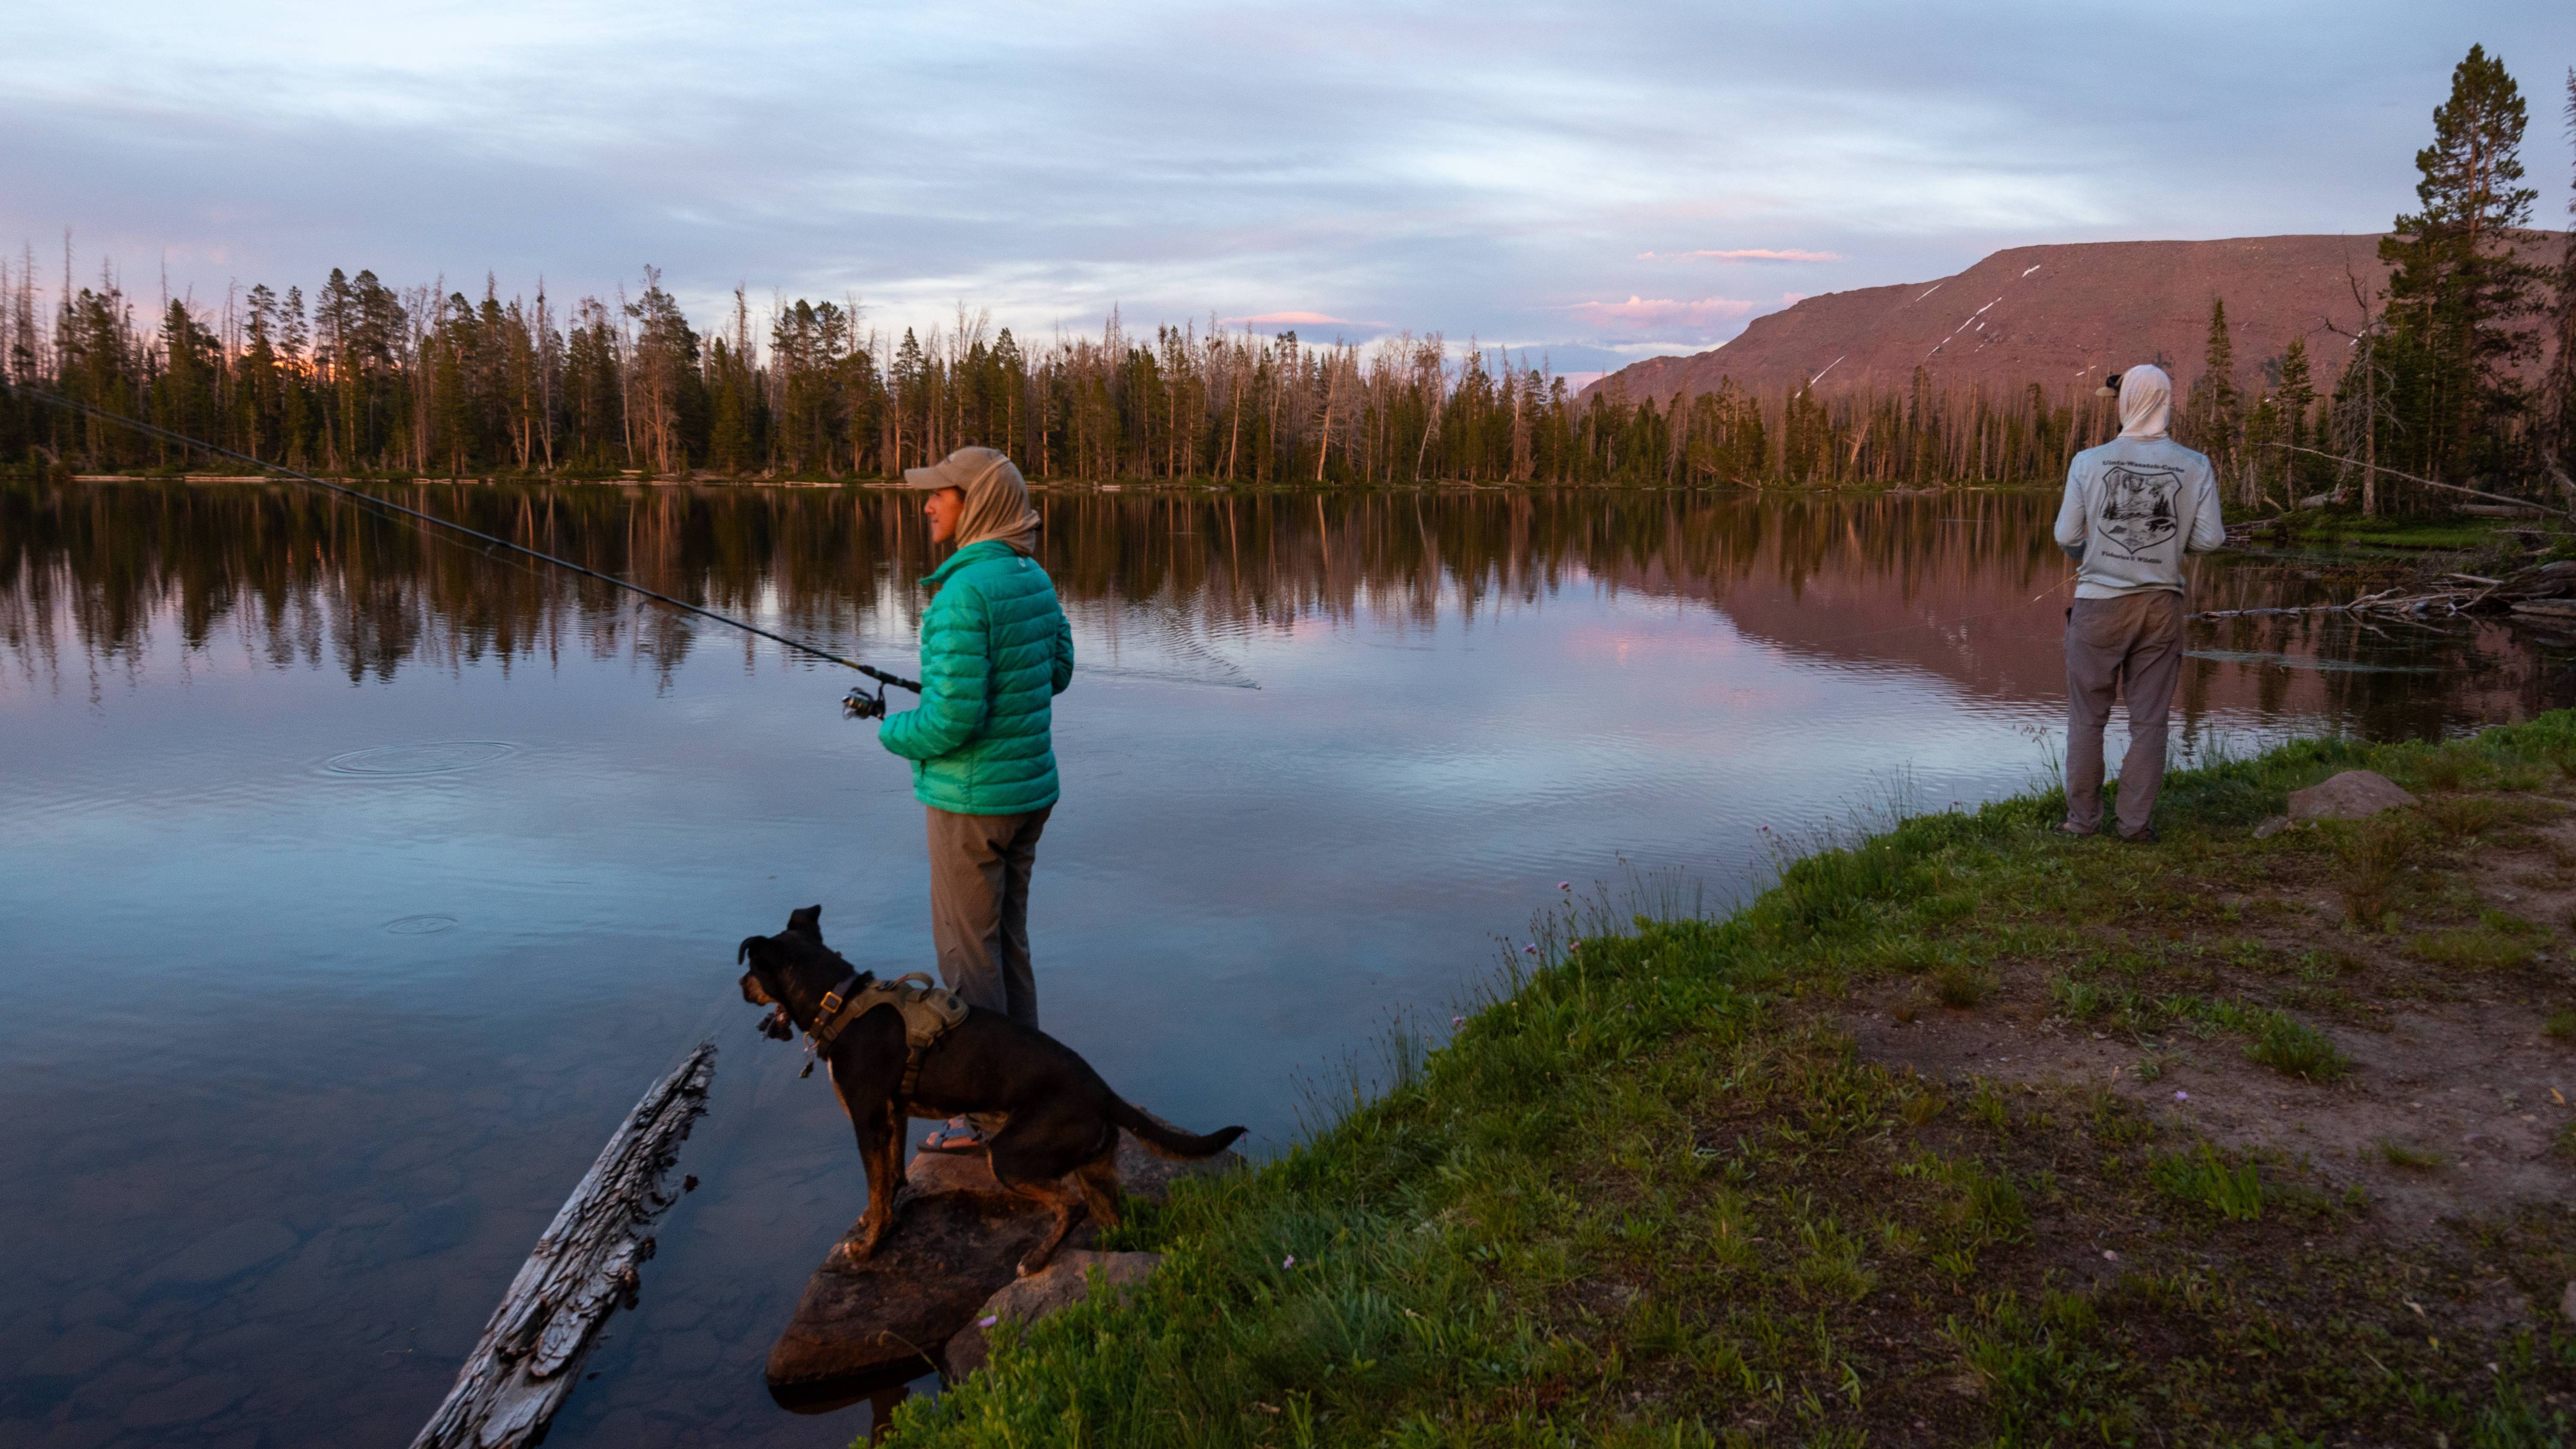 Two people and a dog fishing in a lake